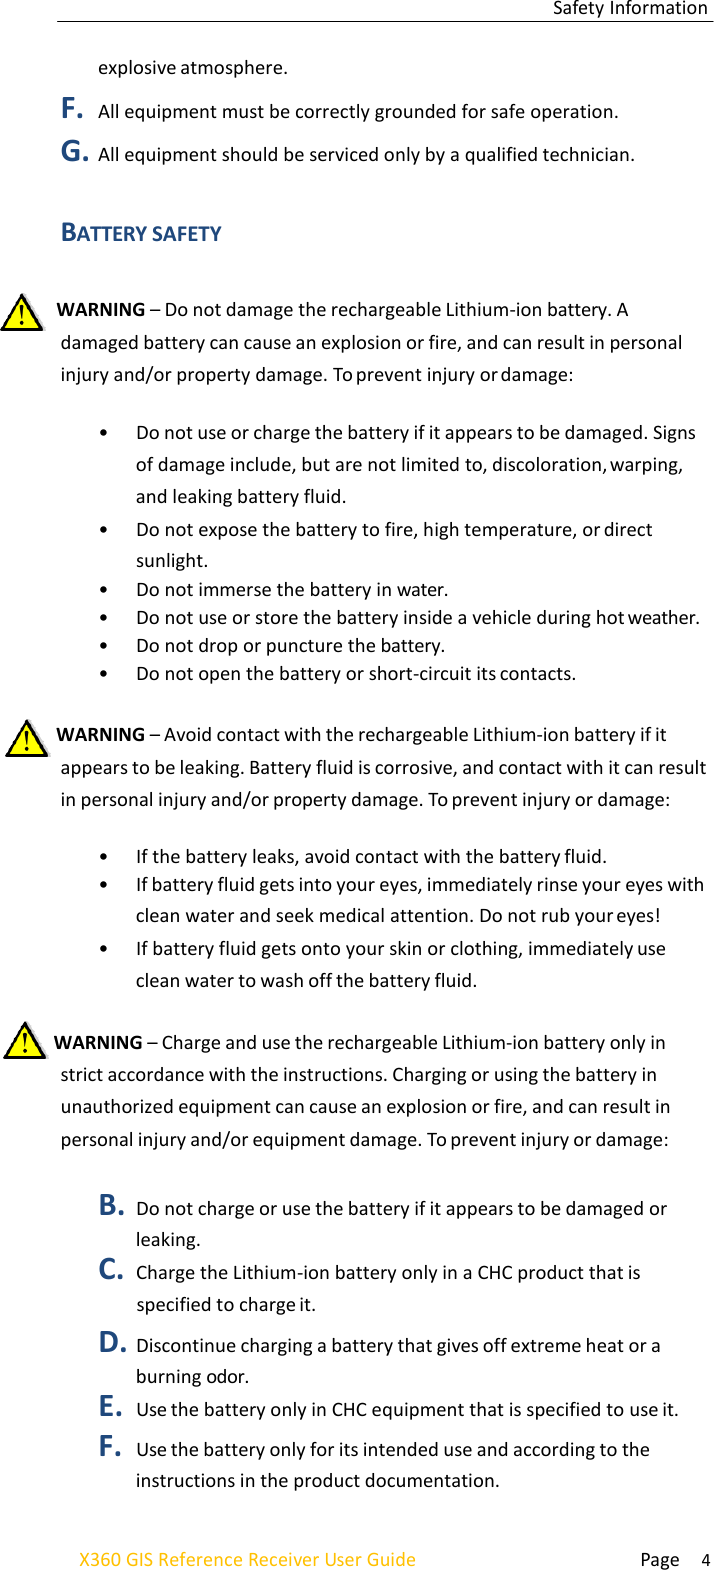  Page 4 X360 GIS Reference Receiver User Guide Safety Information    explosive atmosphere. F. All equipment must be correctly grounded for safe operation. G. All equipment should be serviced only by a qualified technician.   BATTERY SAFETY    WARNING – Do not damage the rechargeable Lithium-ion battery. A damaged battery can cause an explosion or fire, and can result in personal injury and/or property damage. To prevent injury or damage:  • Do not use or charge the battery if it appears to be damaged. Signs of damage include, but are not limited to, discoloration, warping, and leaking battery fluid. • Do not expose the battery to fire, high temperature, or direct sunlight. • Do not immerse the battery in water. • Do not use or store the battery inside a vehicle during hot weather. • Do not drop or puncture the battery. • Do not open the battery or short-circuit its contacts.   WARNING – Avoid contact with the rechargeable Lithium-ion battery if it appears to be leaking. Battery fluid is corrosive, and contact with it can result in personal injury and/or property damage. To prevent injury or damage:  • If the battery leaks, avoid contact with the battery fluid. • If battery fluid gets into your eyes, immediately rinse your eyes with clean water and seek medical attention. Do not rub your eyes! • If battery fluid gets onto your skin or clothing, immediately use clean water to wash off the battery fluid.   WARNING – Charge and use the rechargeable Lithium-ion battery only in strict accordance with the instructions. Charging or using the battery in unauthorized equipment can cause an explosion or fire, and can result in personal injury and/or equipment damage. To prevent injury or damage:  B. Do not charge or use the battery if it appears to be damaged or leaking. C. Charge the Lithium-ion battery only in a CHC product that is specified to charge it. D. Discontinue charging a battery that gives off extreme heat or a burning odor. E. Use the battery only in CHC equipment that is specified to use it. F. Use the battery only for its intended use and according to the instructions in the product documentation. 